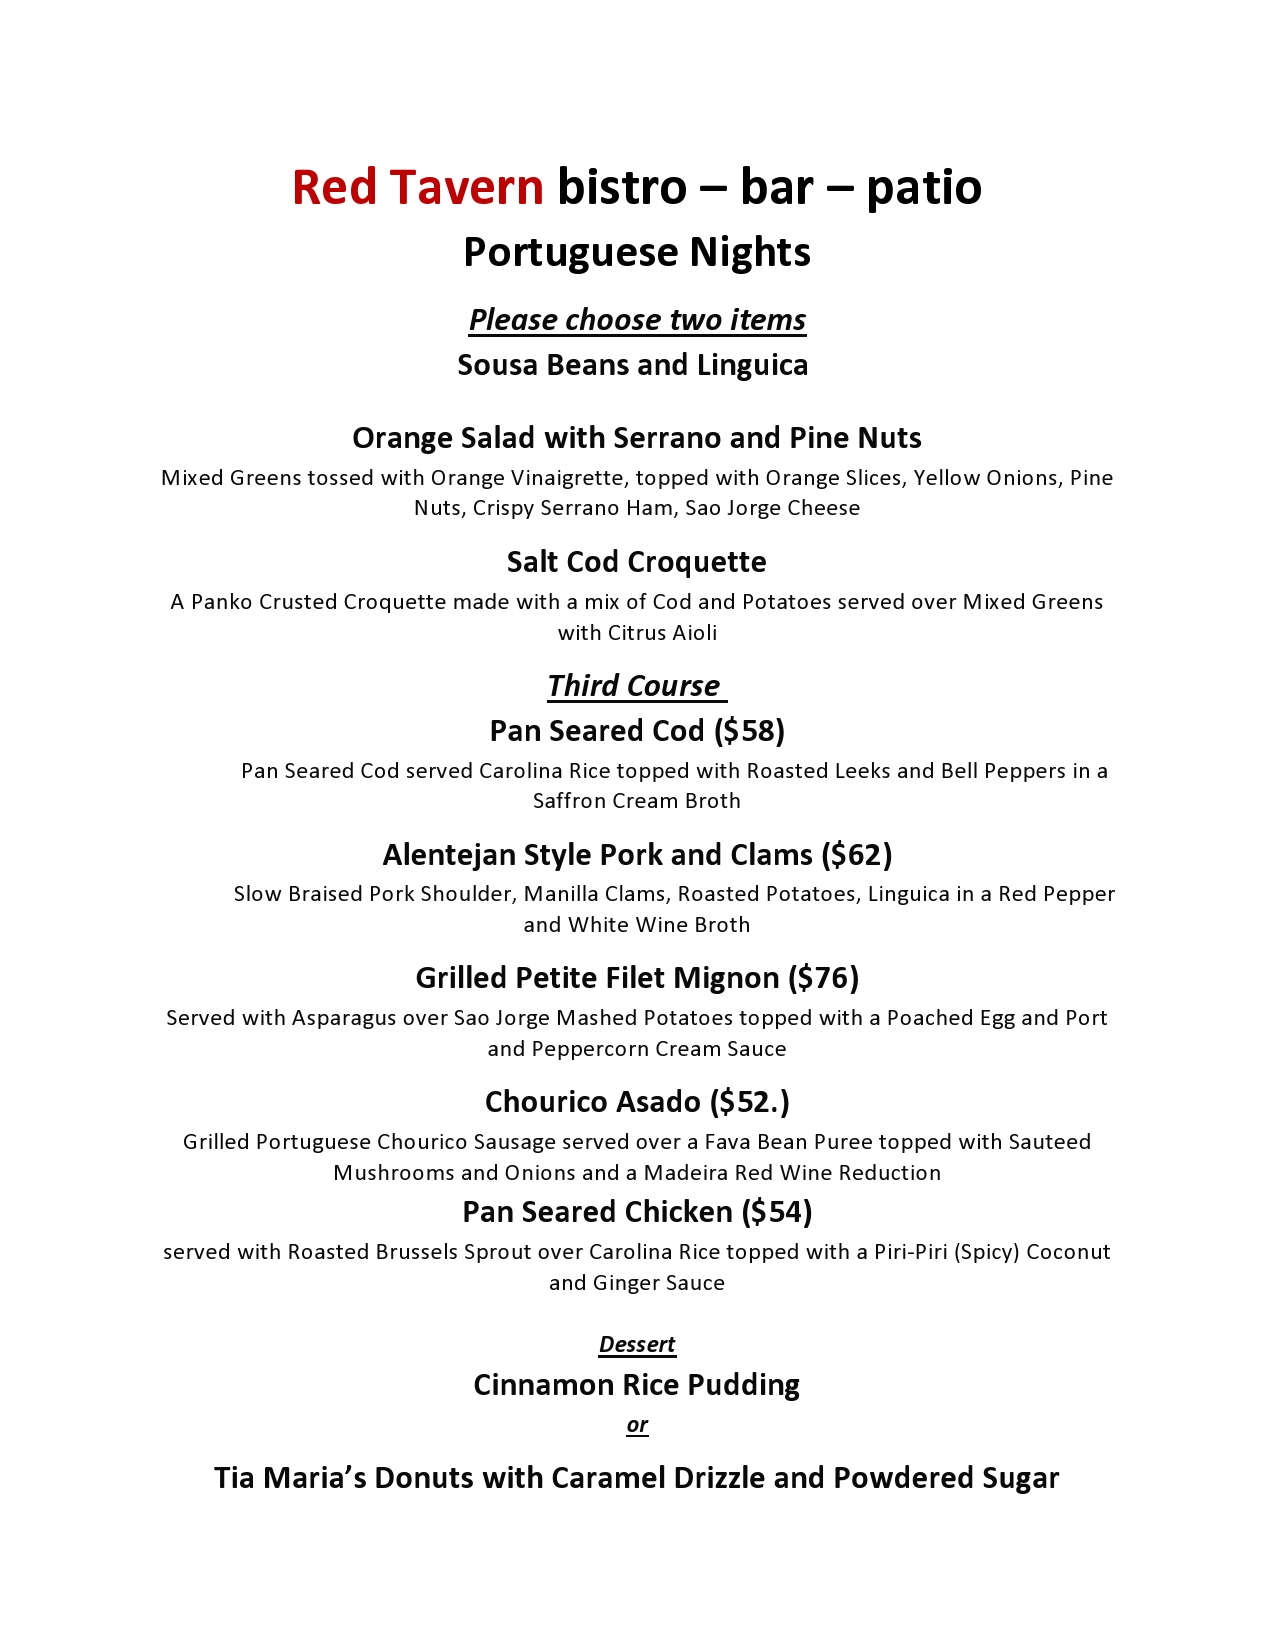 Red Tavern upcoming event: Portuguese Nights